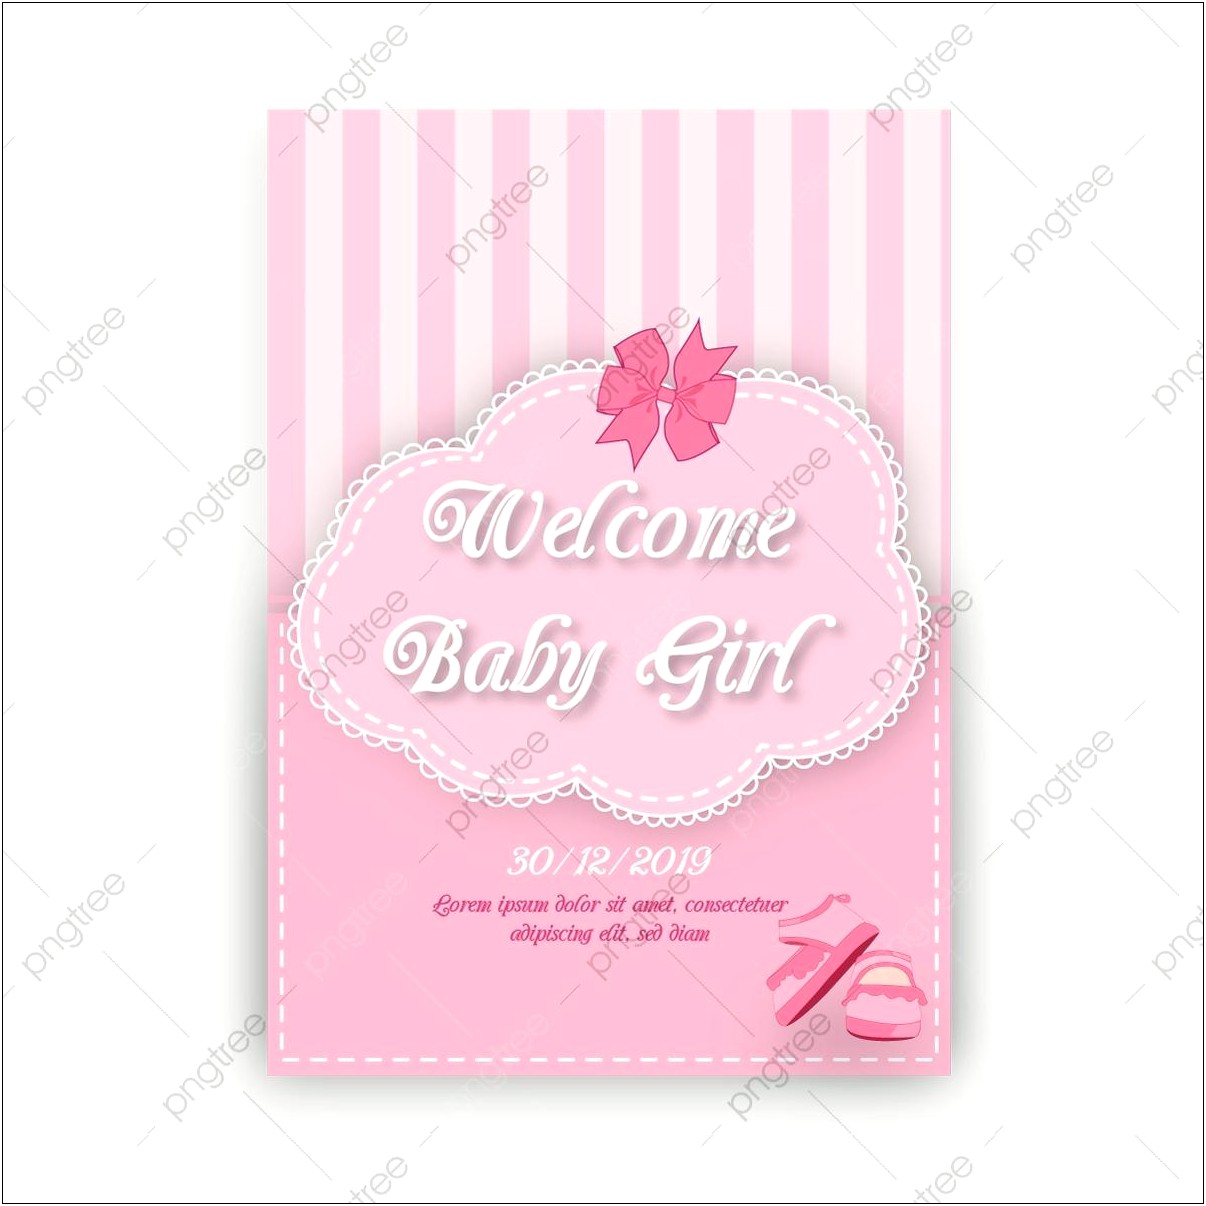 Invitation Templates Free Download For Baby Shower